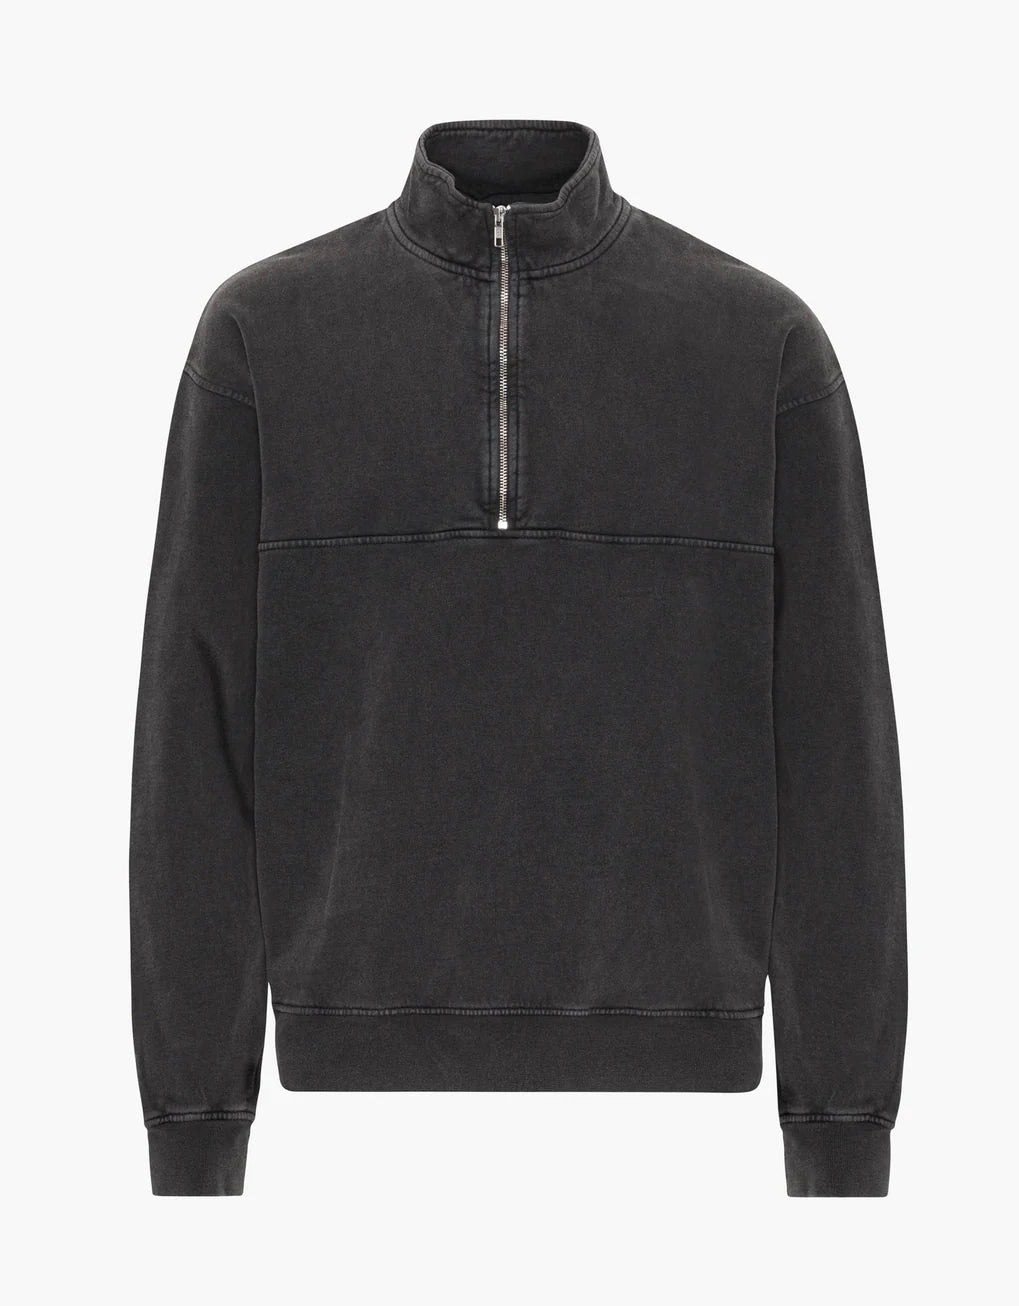 A Colorful Standard Organic Quarter Zip - Faded Black sweatshirt with a zipper on the side.